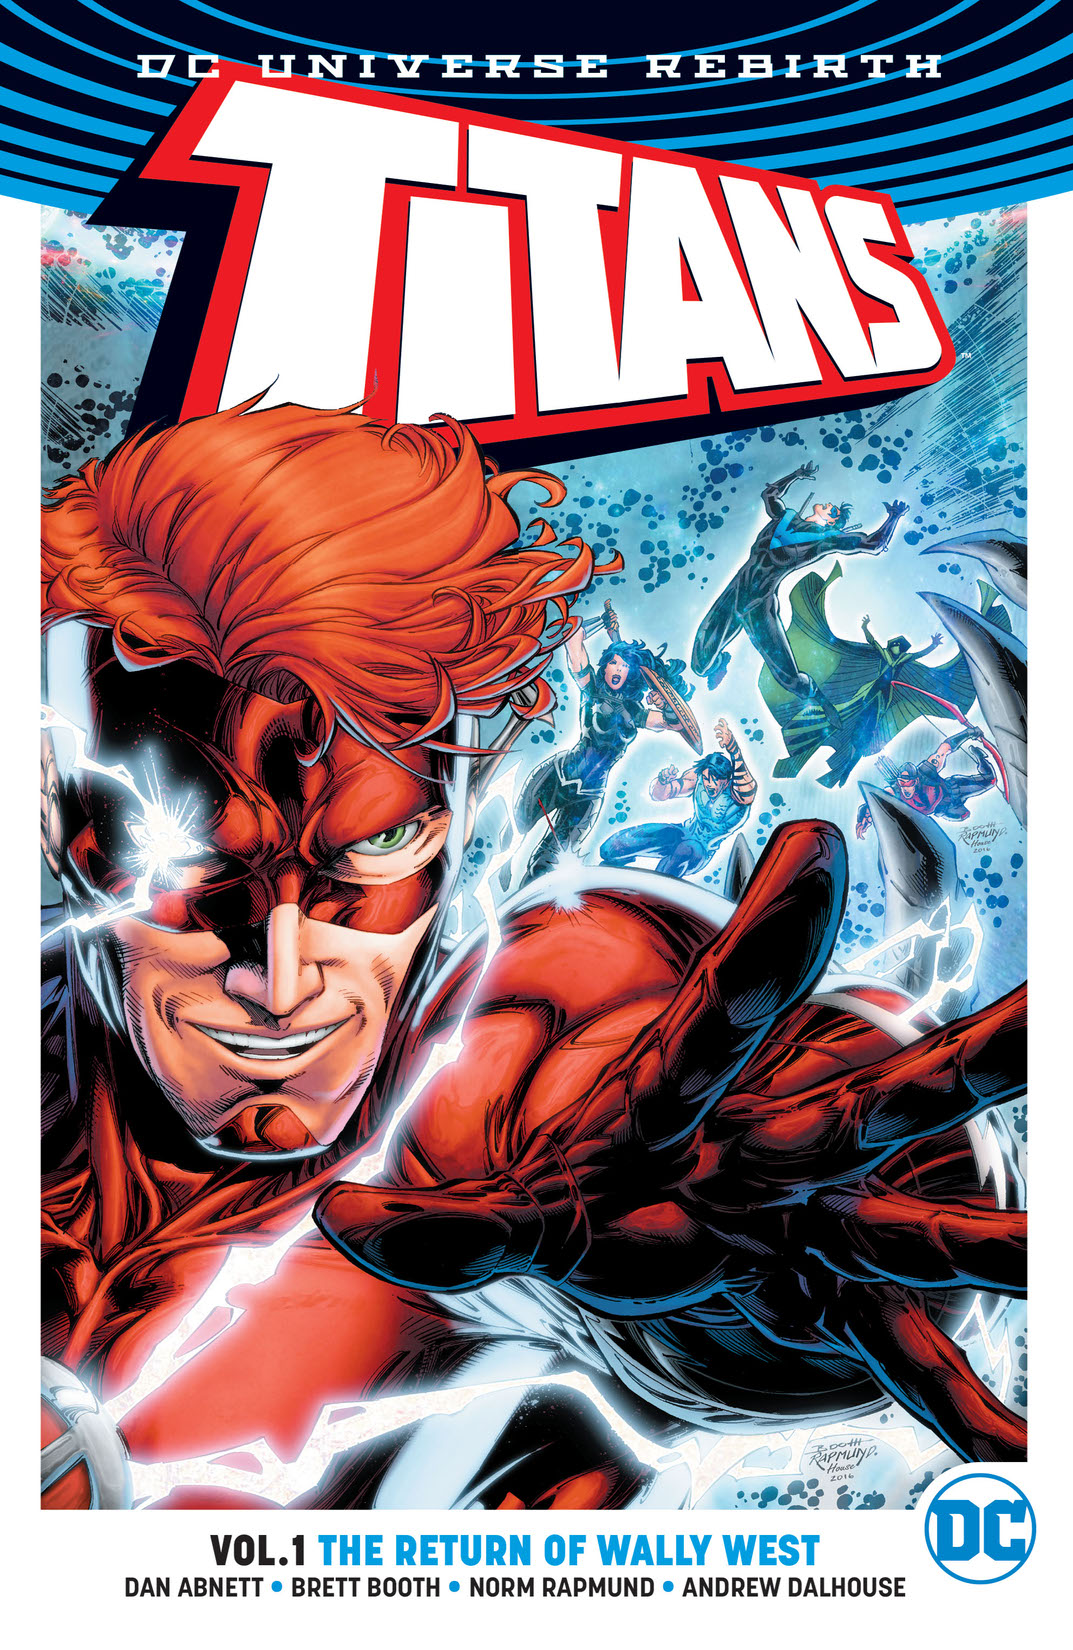 Titans Vol. 1: The Return of Wally West preview images